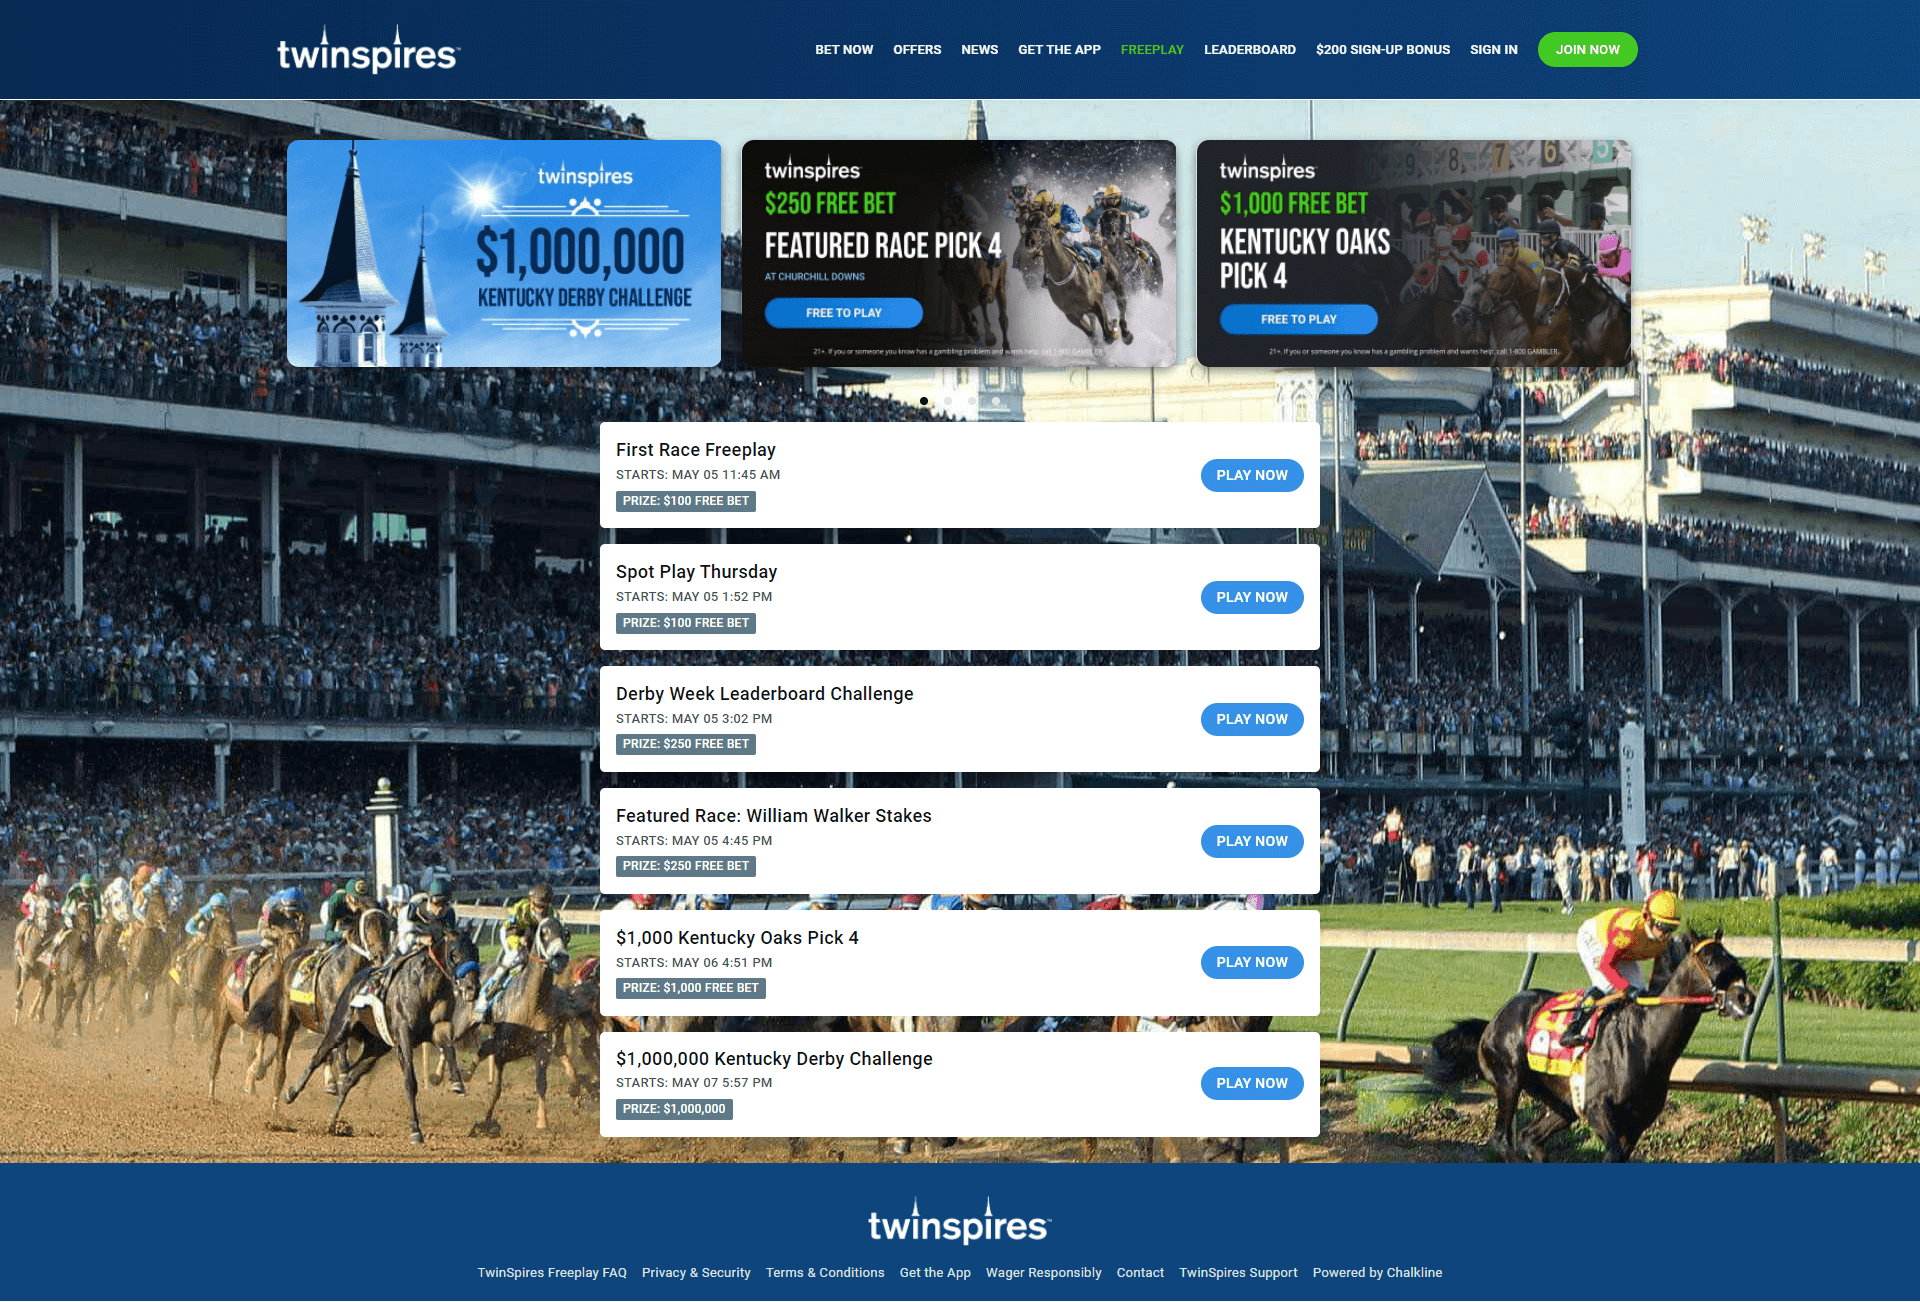 Chalkline Teams Up with TwinSpires to Power the $1,000,000 Kentucky Derby Challenge for the Fourth Year Running  